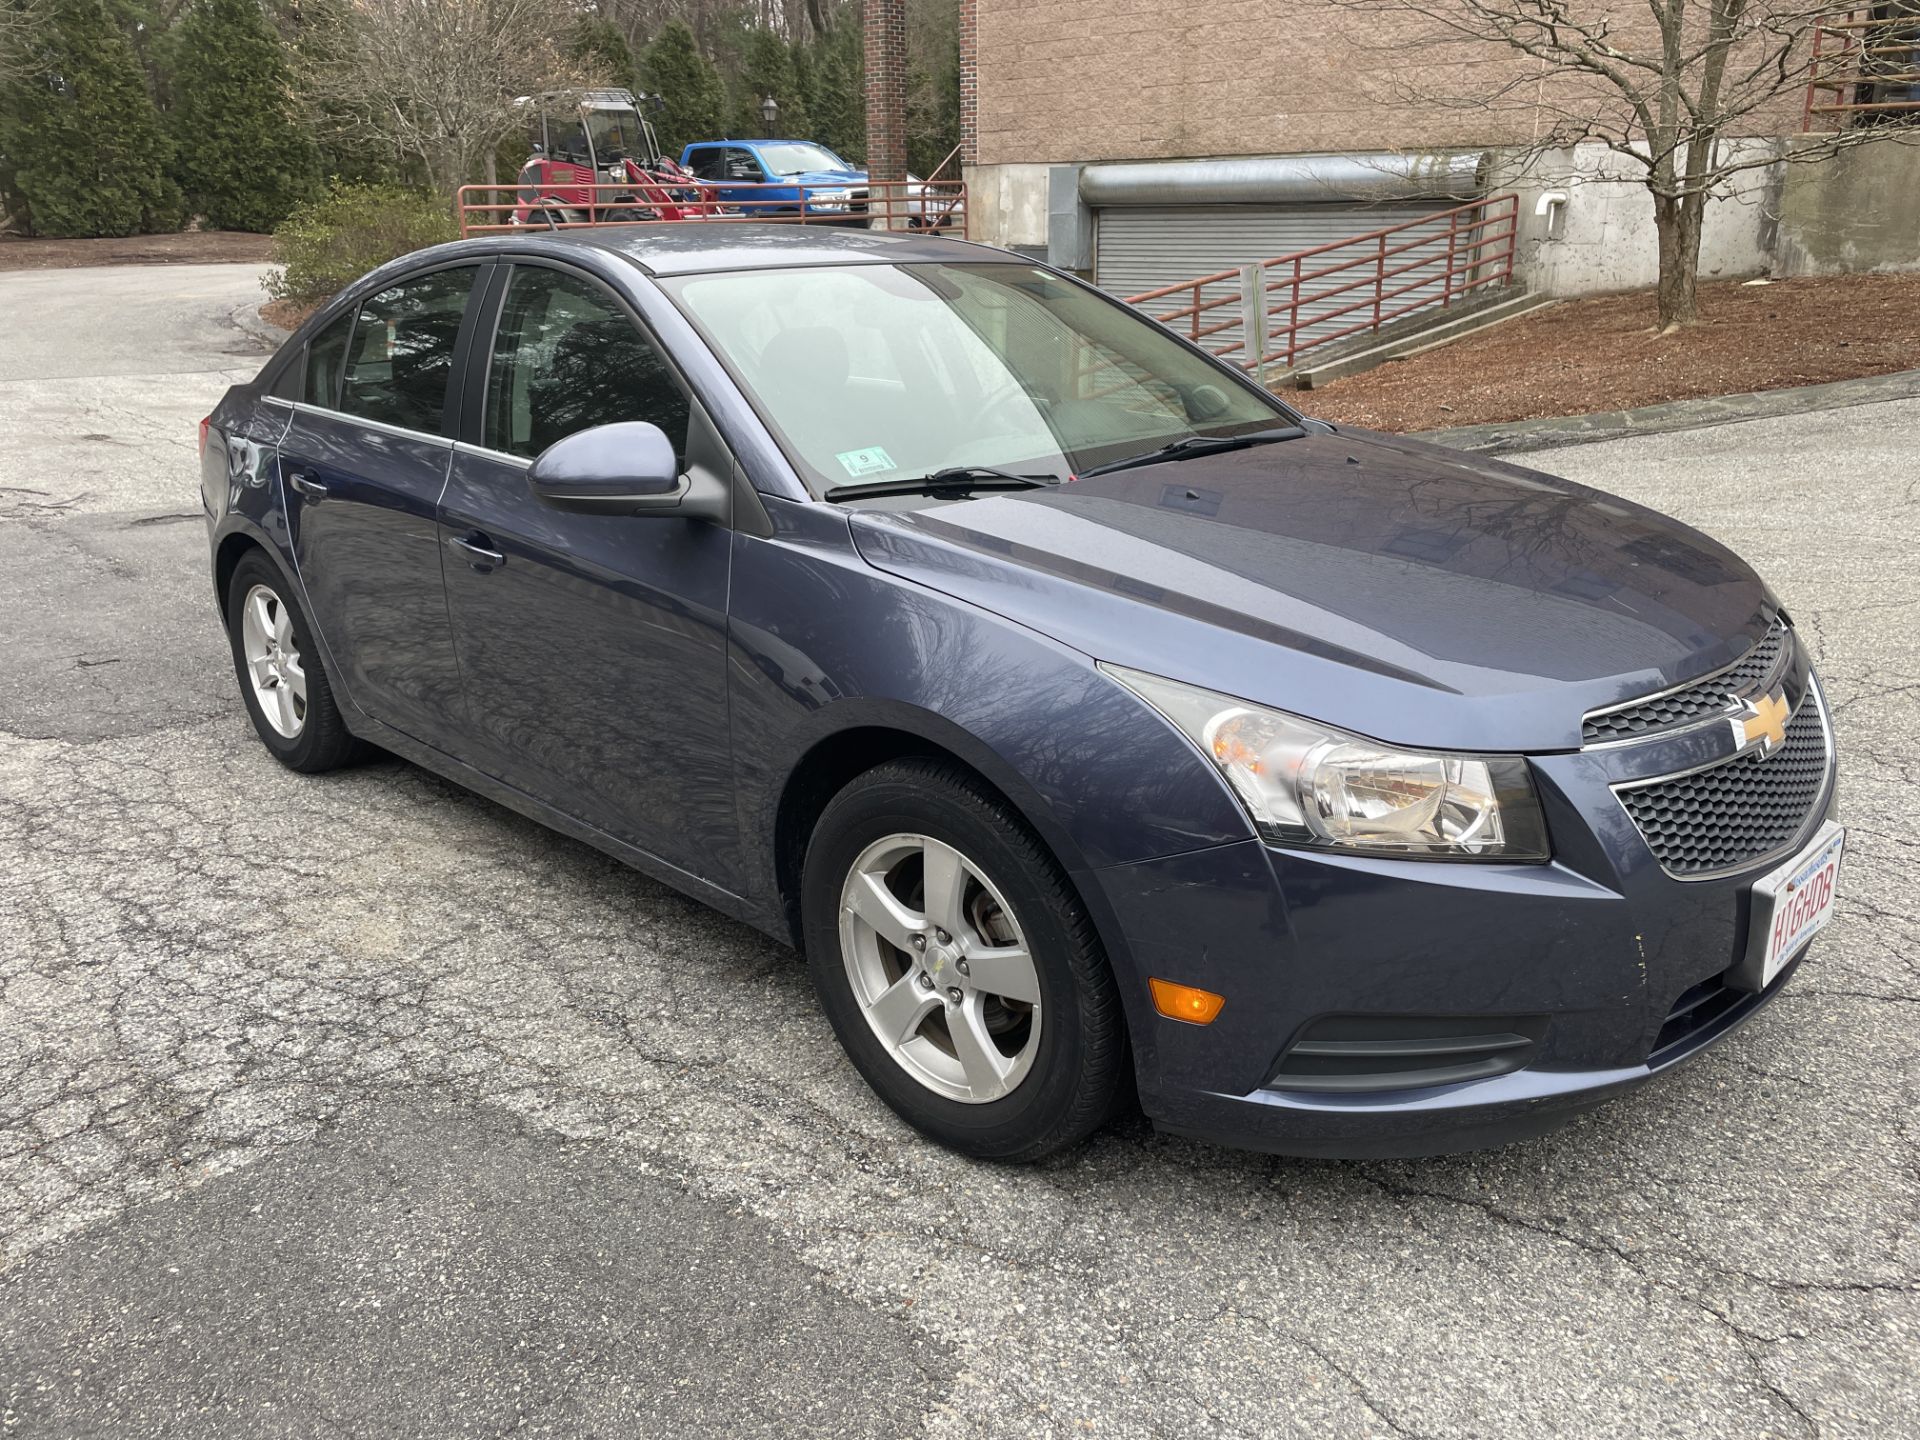 2013 Chevy Cruze Odom: 25,066, Vin:1GC1PC5SB5D7141735 (Has Ceiling Liner Issues) (THIS UNIT CAN'T BE - Image 6 of 16